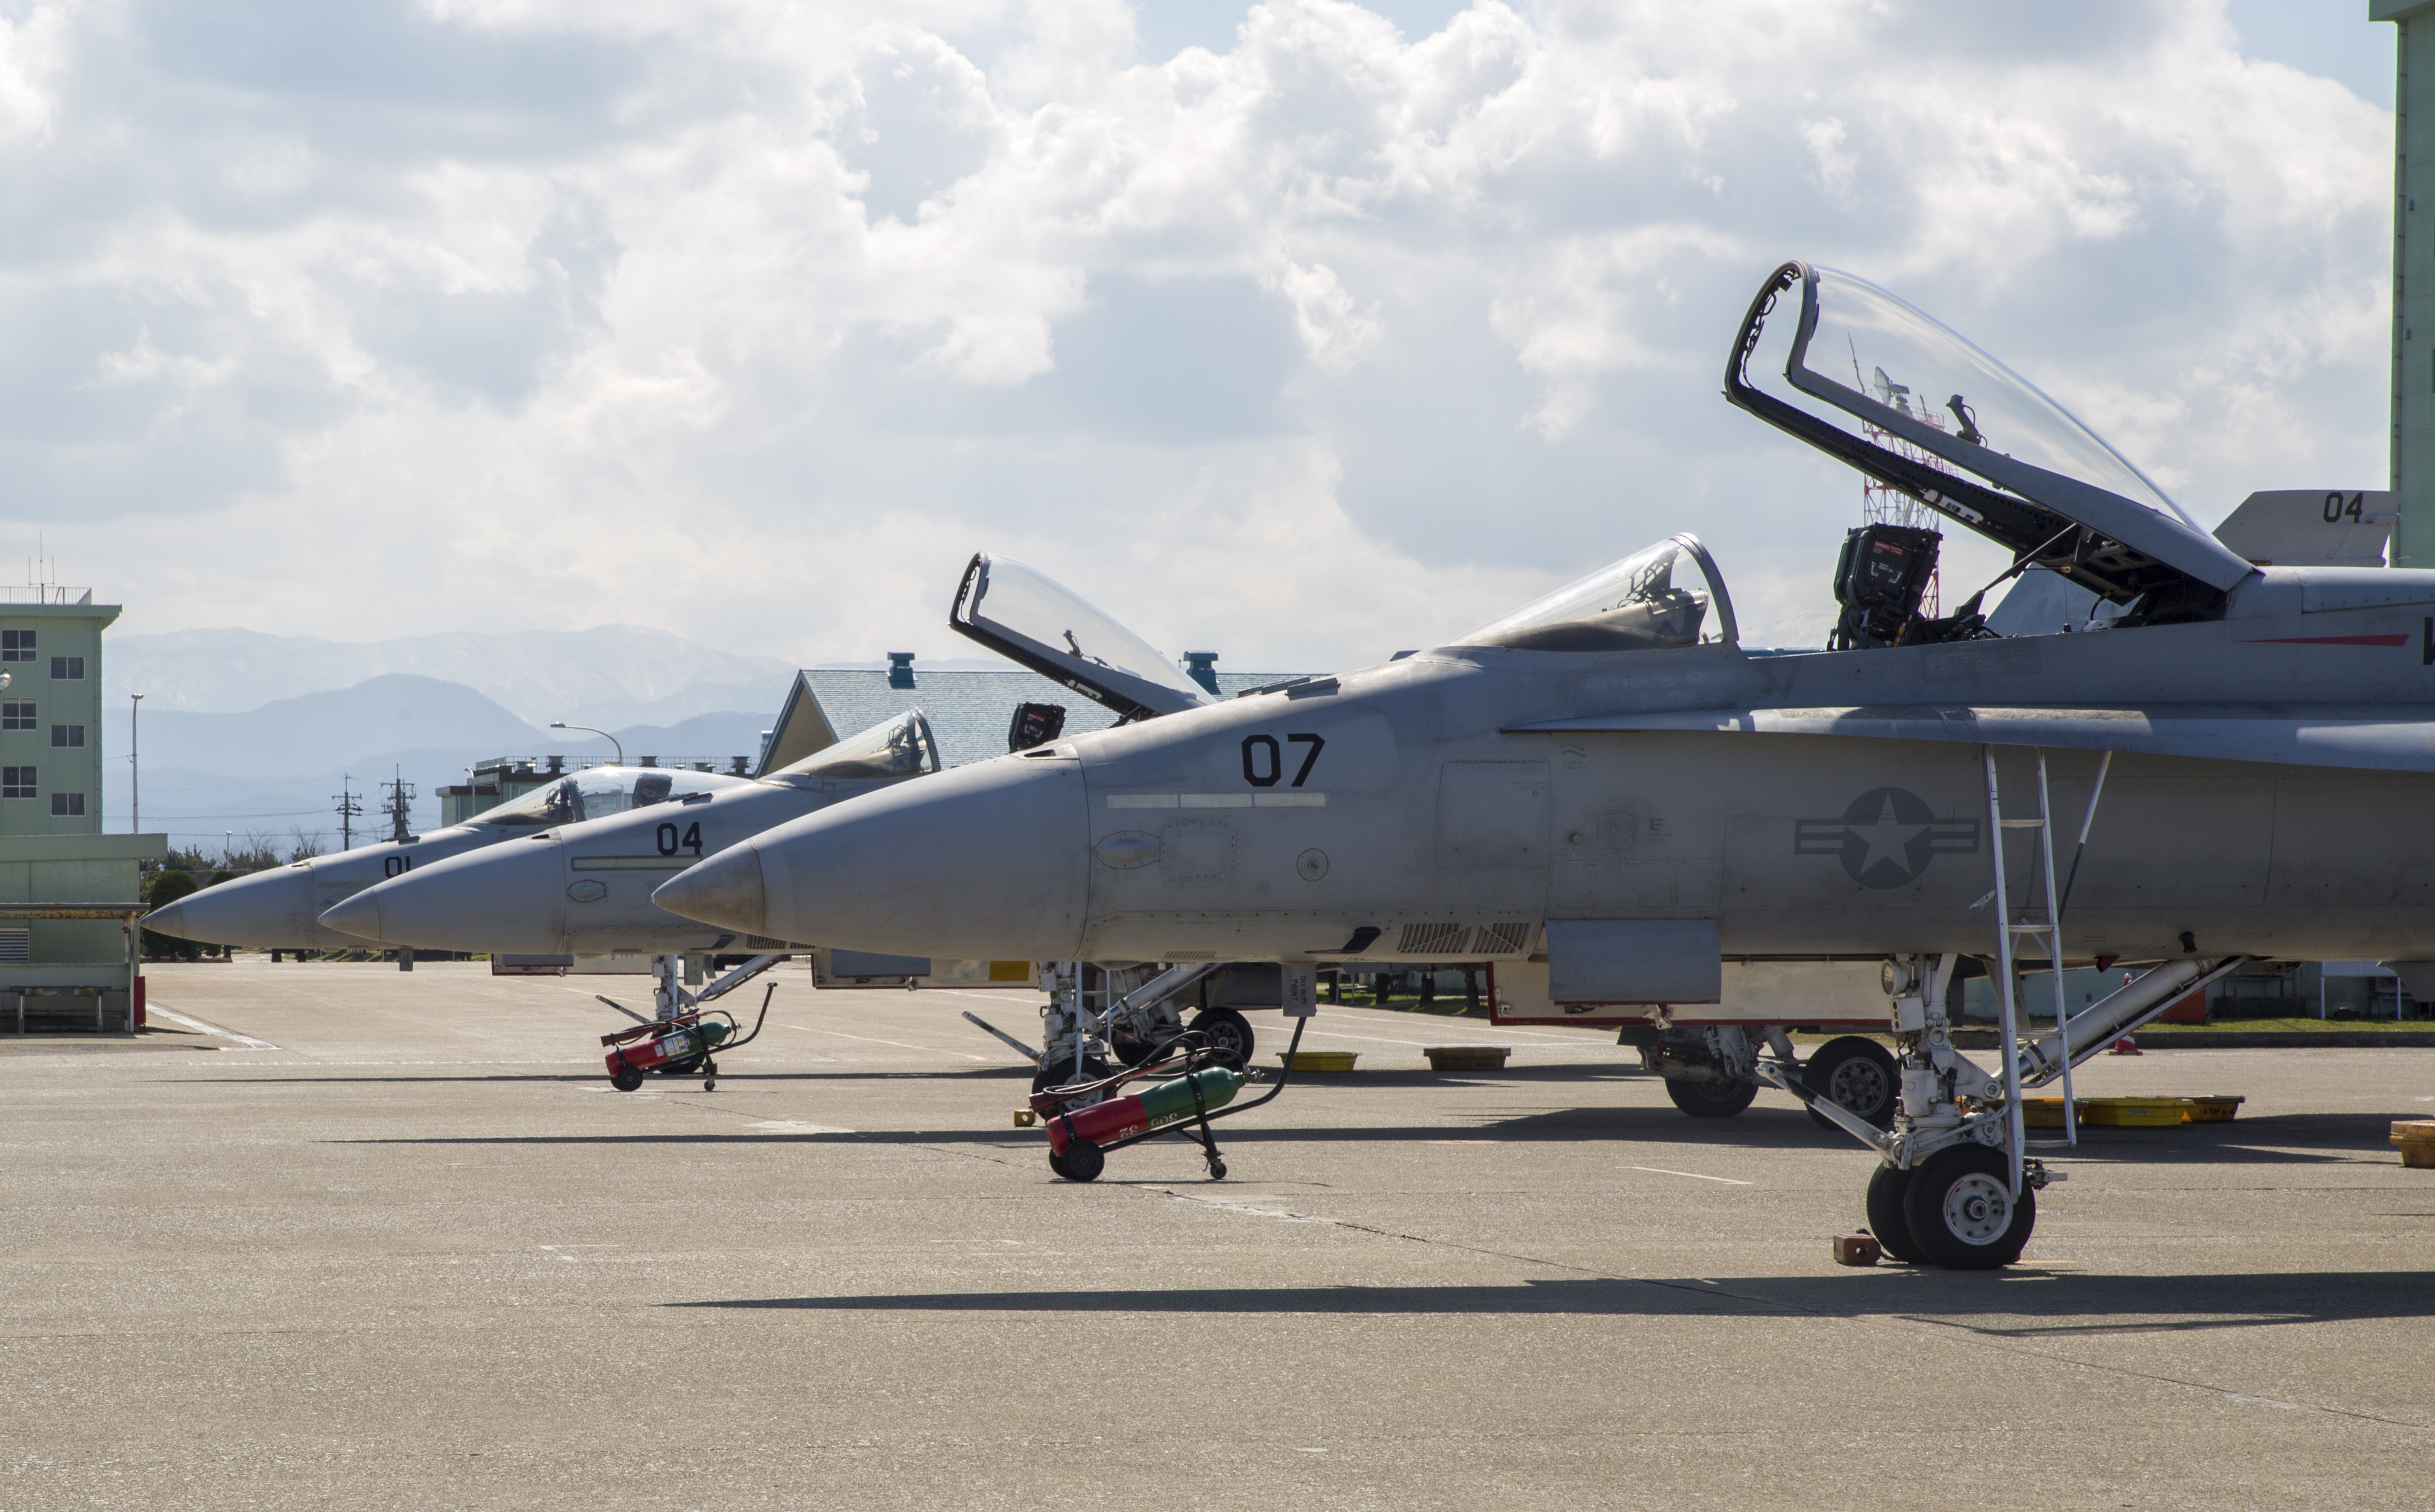 FA-18A++ Hornets with Marine Fighter Attack Squadron(VMFA) 314, forward based at Marine Corps Air Station Iwakuni, Japan, are lined up on the flightline at Komatsu Air Base, Japan, during the Komatsu Aviation Training Relocation exercise March 7-18, 2016. US Marine Corps photo.